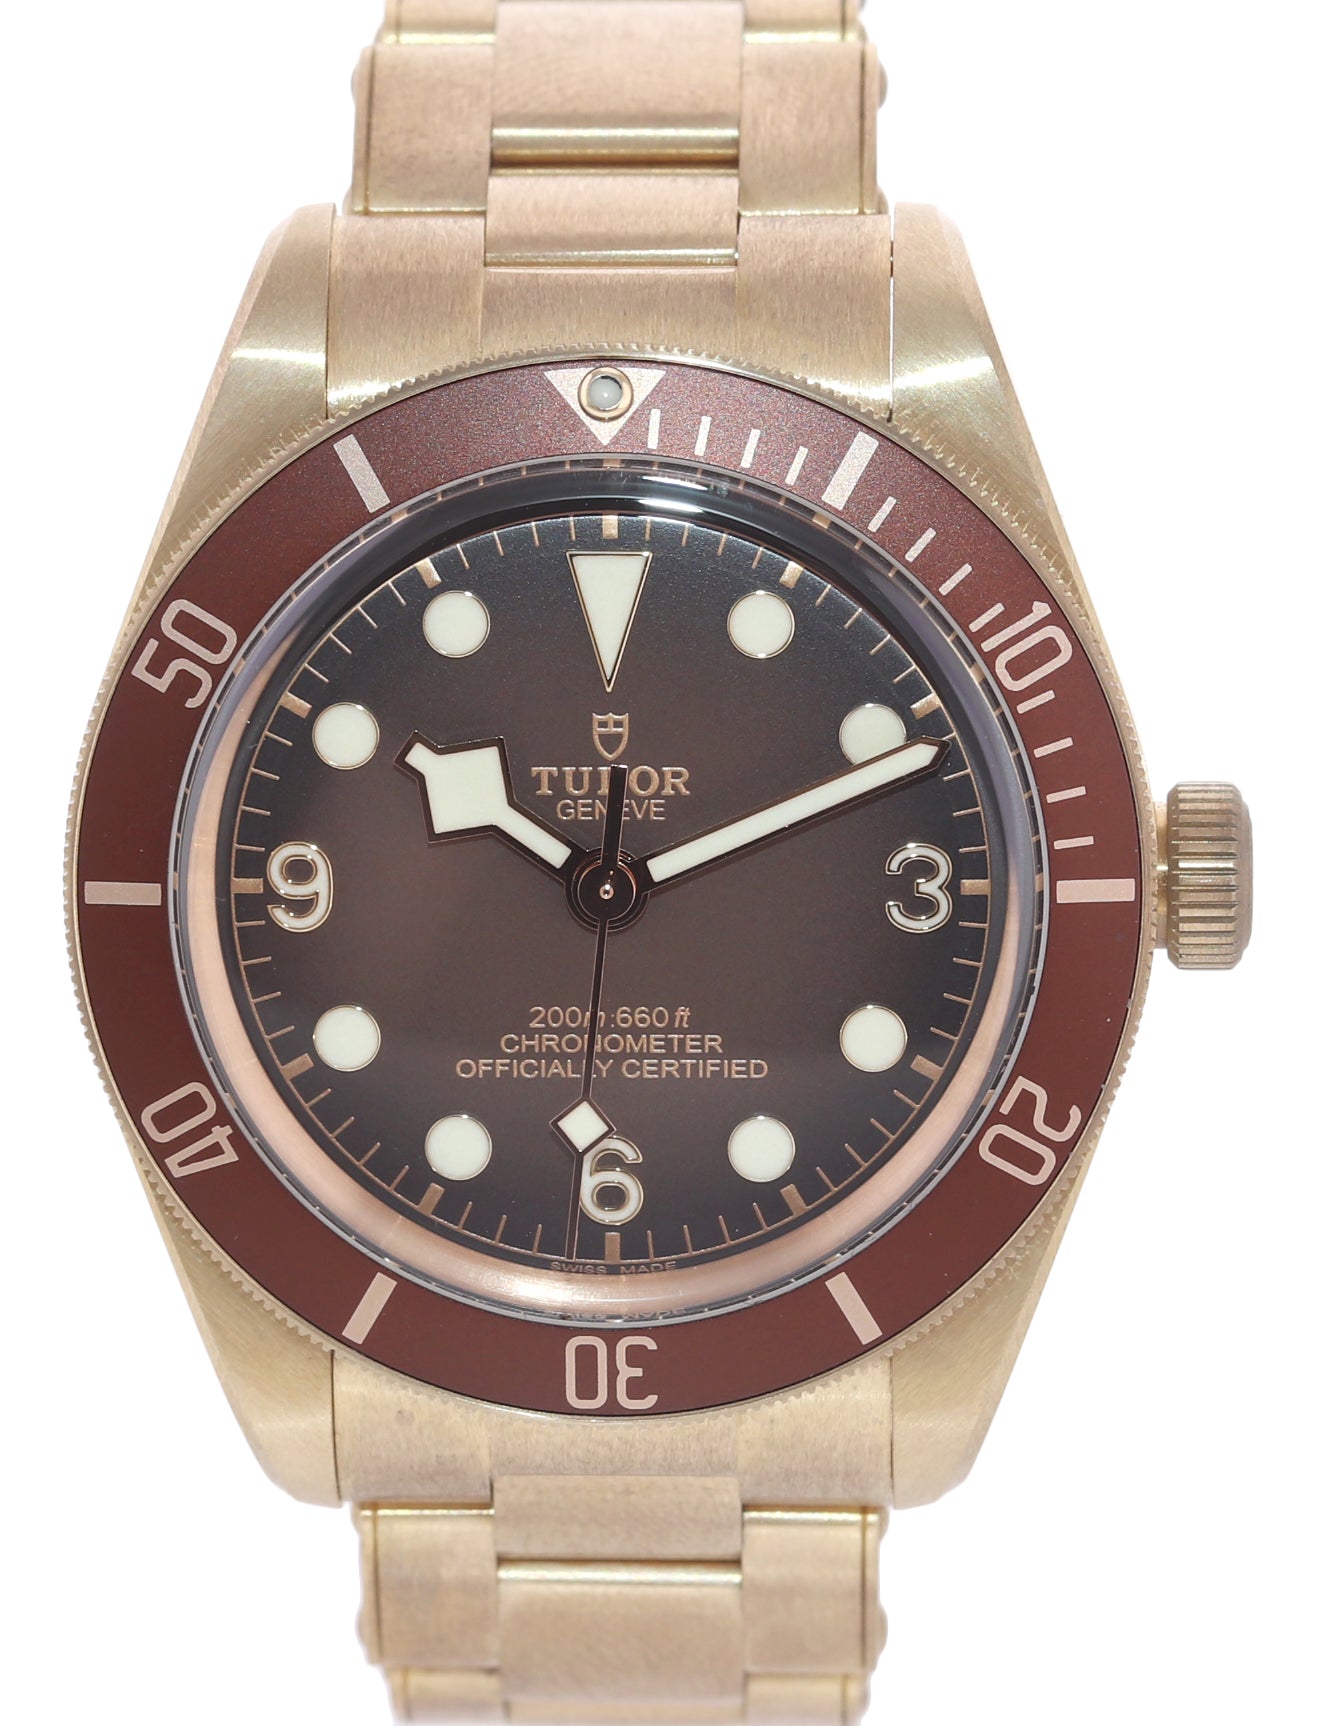 PAPERS 2021 Tudor Black Bay Fifty Eight 58 Chocolate Bronze 39mm Watch 79012 Box